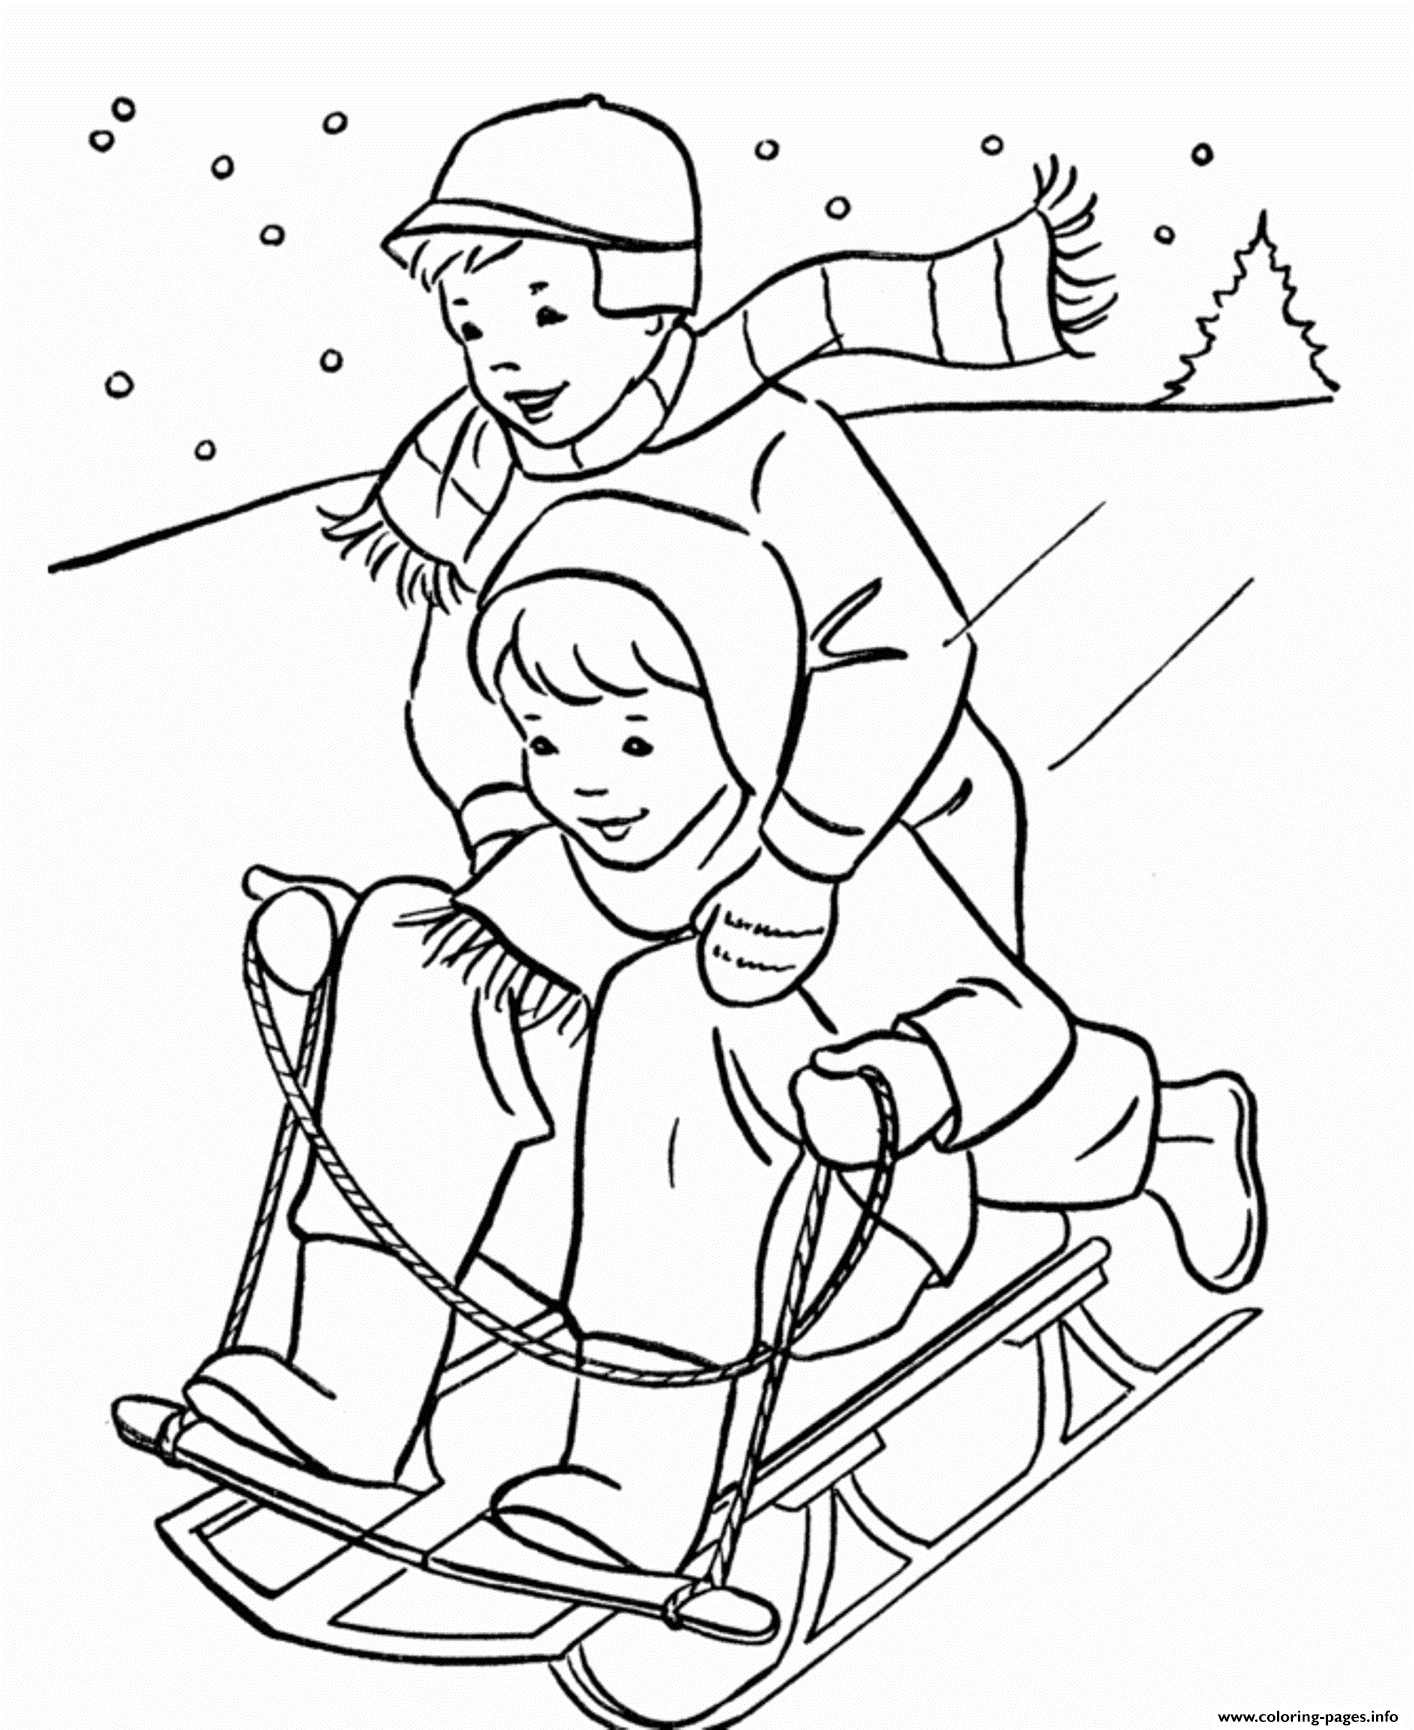 Free Coloring Pages Children Playing
 Kids Playing Sled In The Winter S6625 Coloring Pages Printable